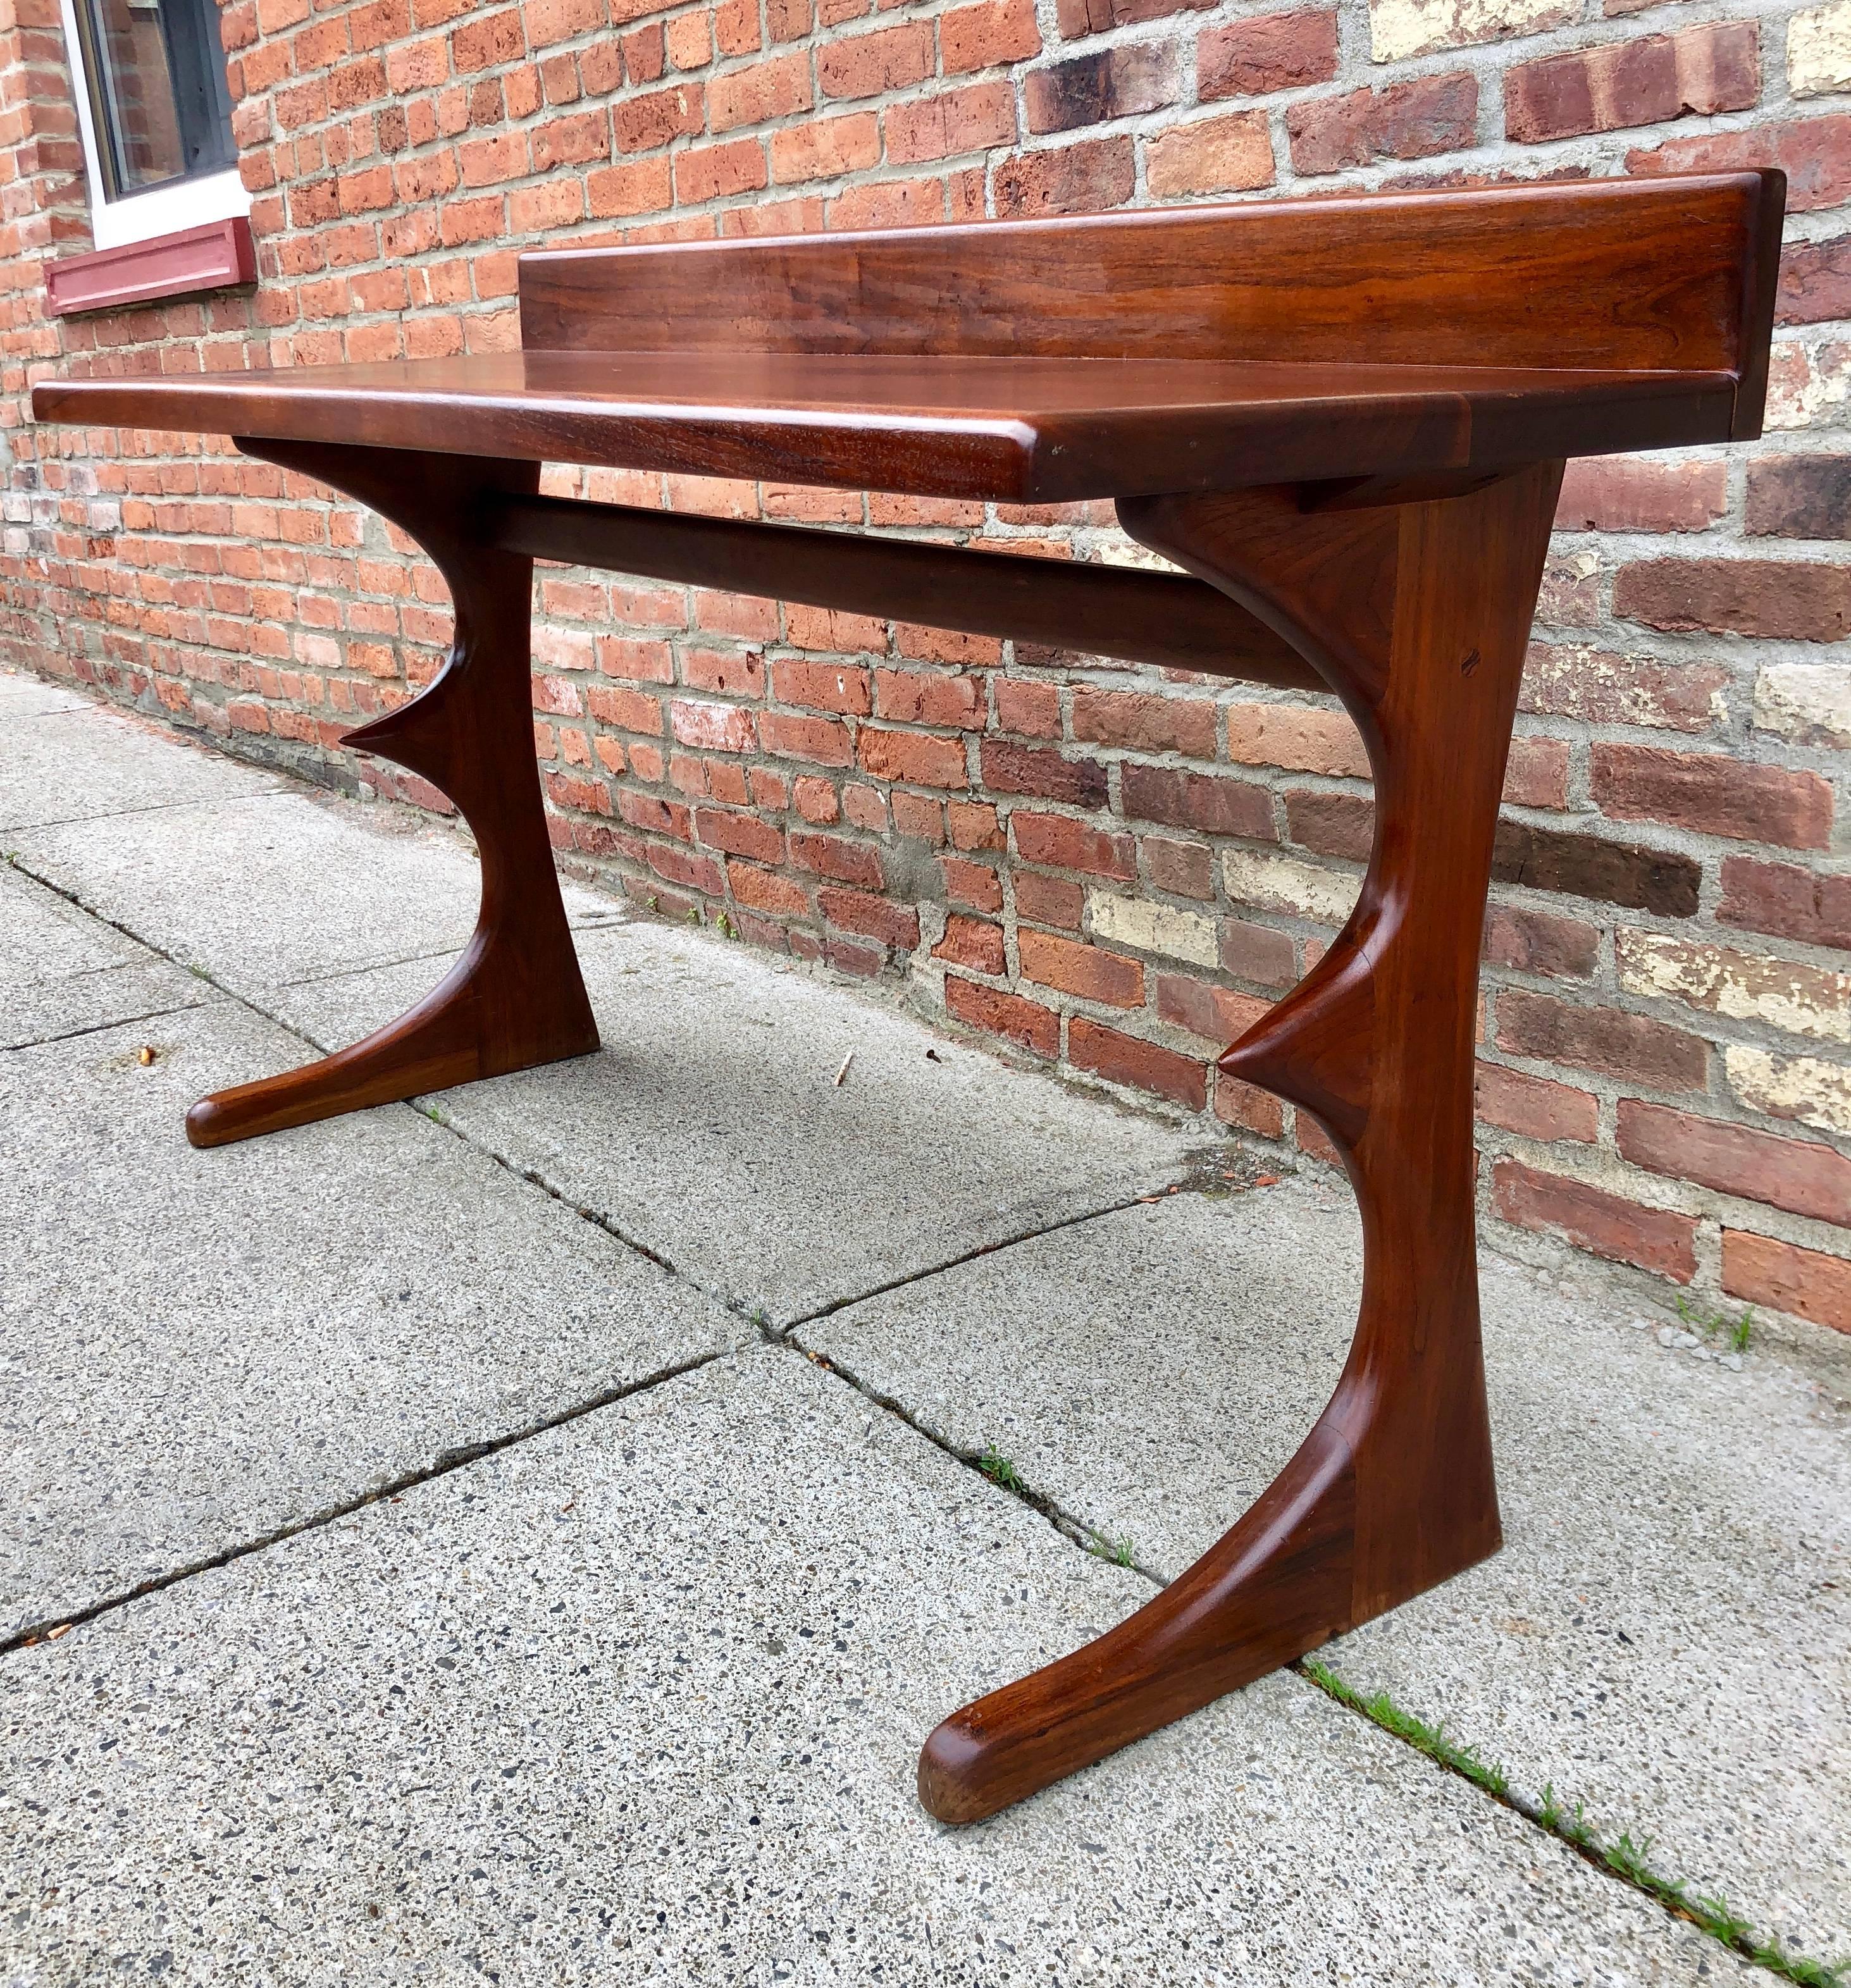 Solid black walnut writing or console table with masterfully carved animal-like sculpted legs, circa 1970. Peg constructed with decorative exposed mortise, the table retains its original linseed oil finish. Tabletop height is 29”. From a Robert